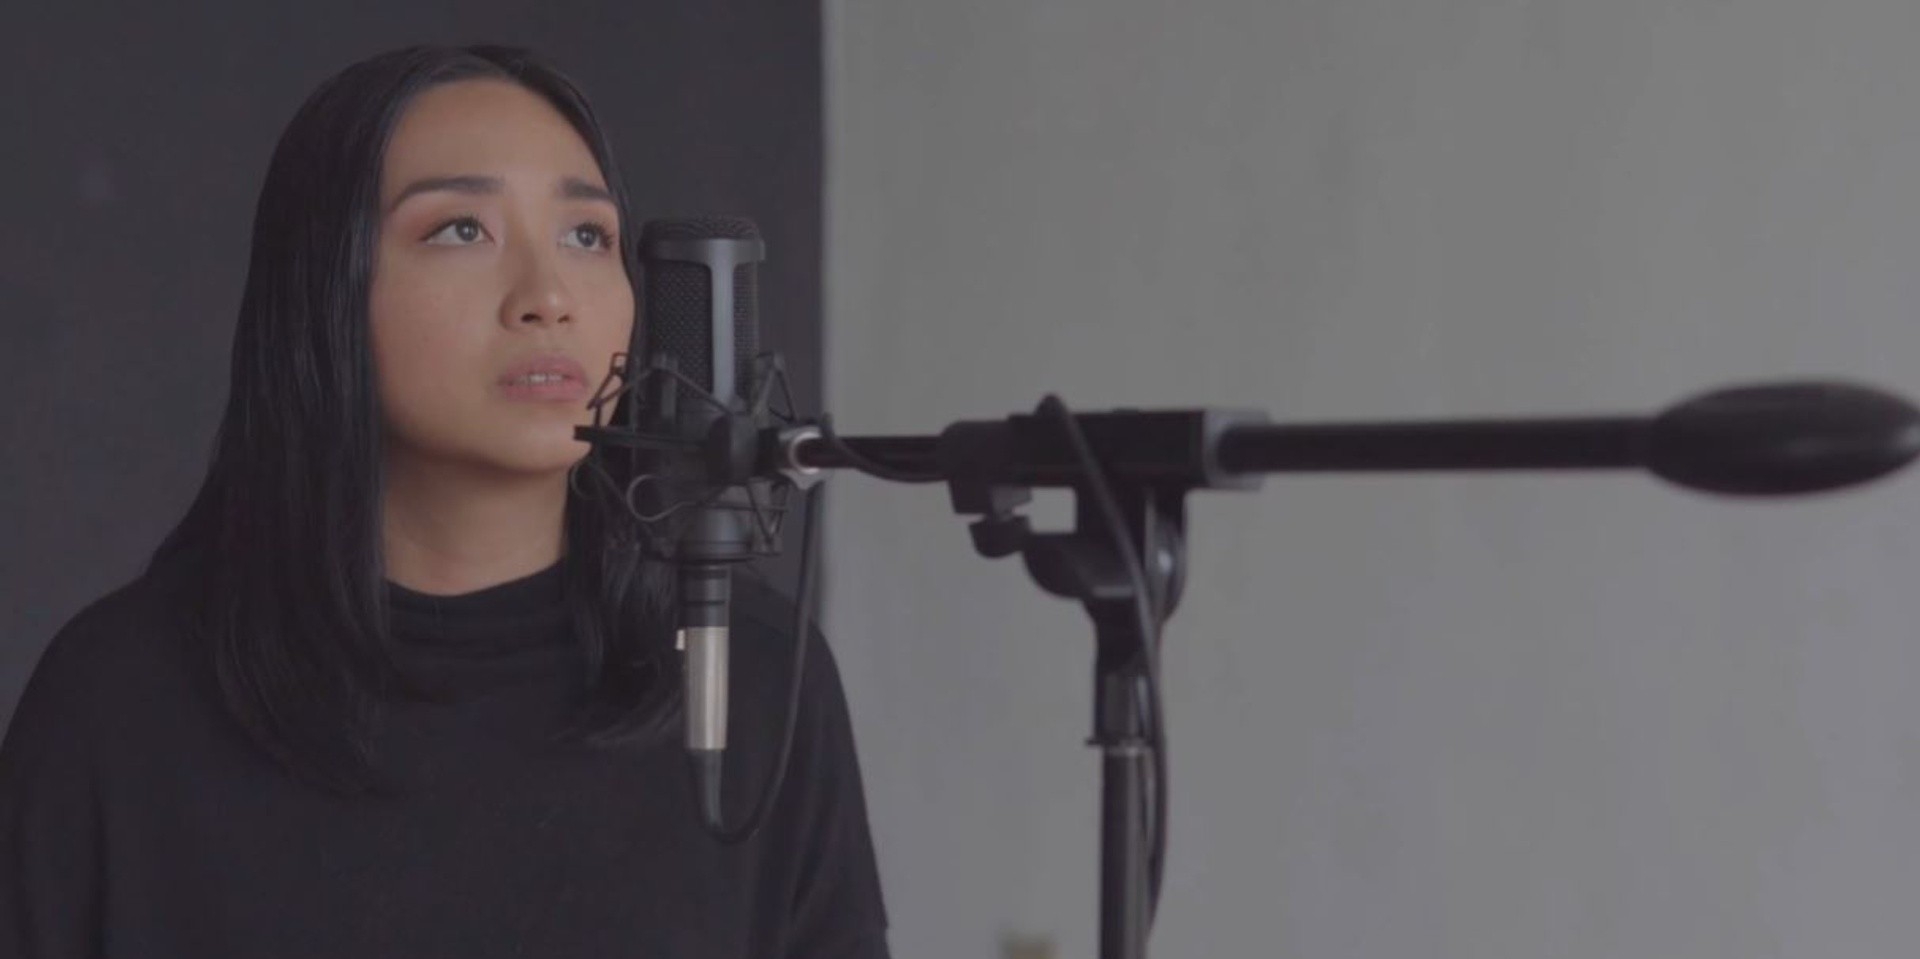 D'Sound and Armi Millare release 'Somewhere in Between' music video – watch